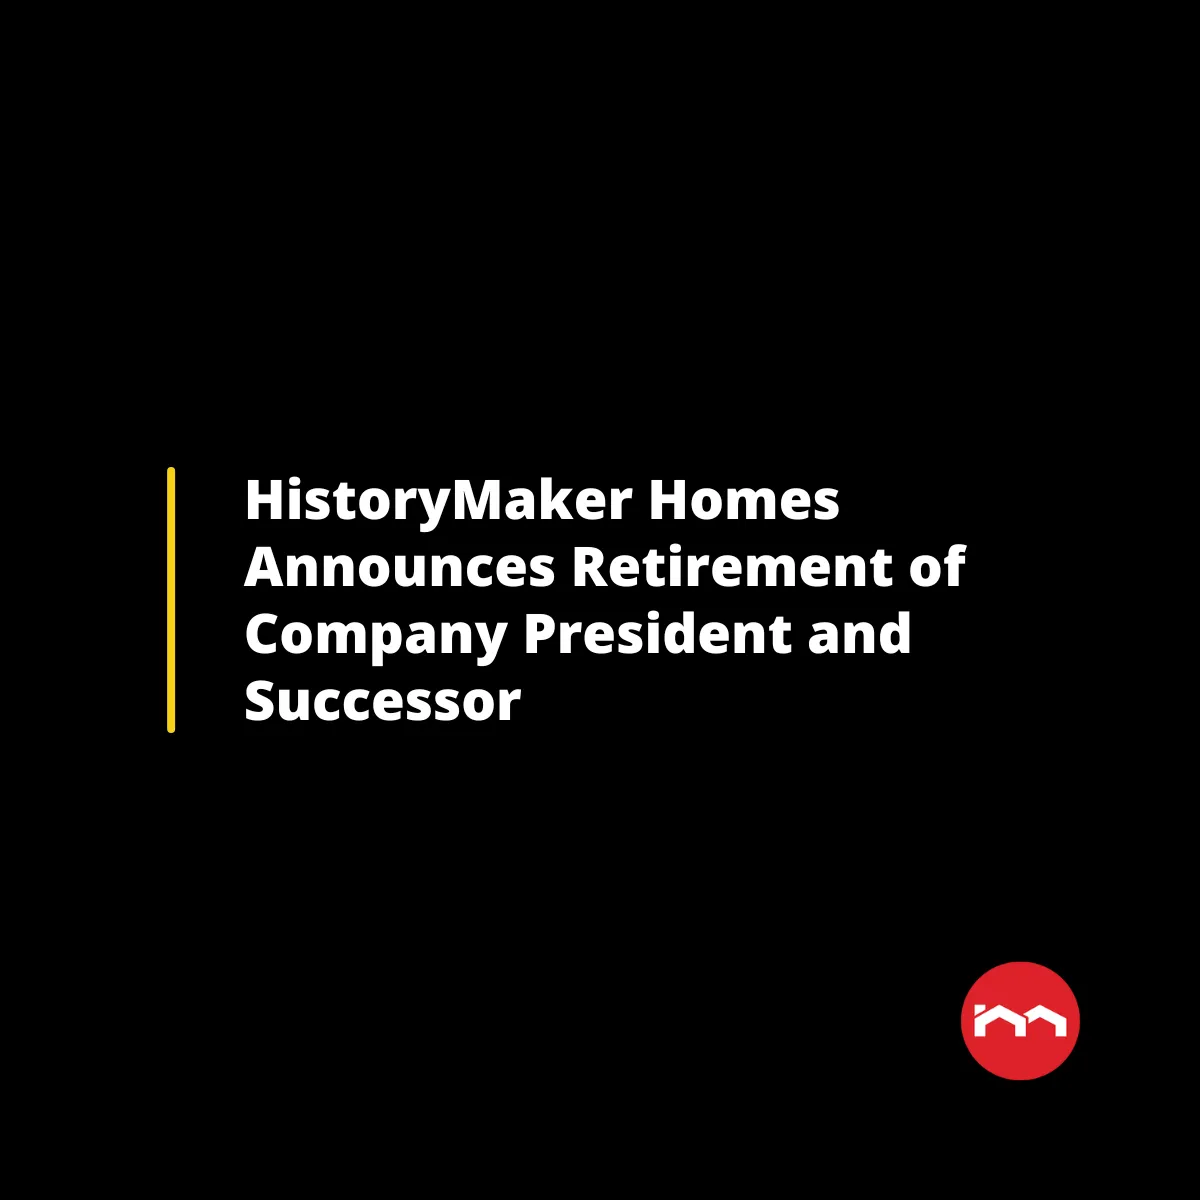 HistoryMaker Homes Announces Retirement of Company President And Successor